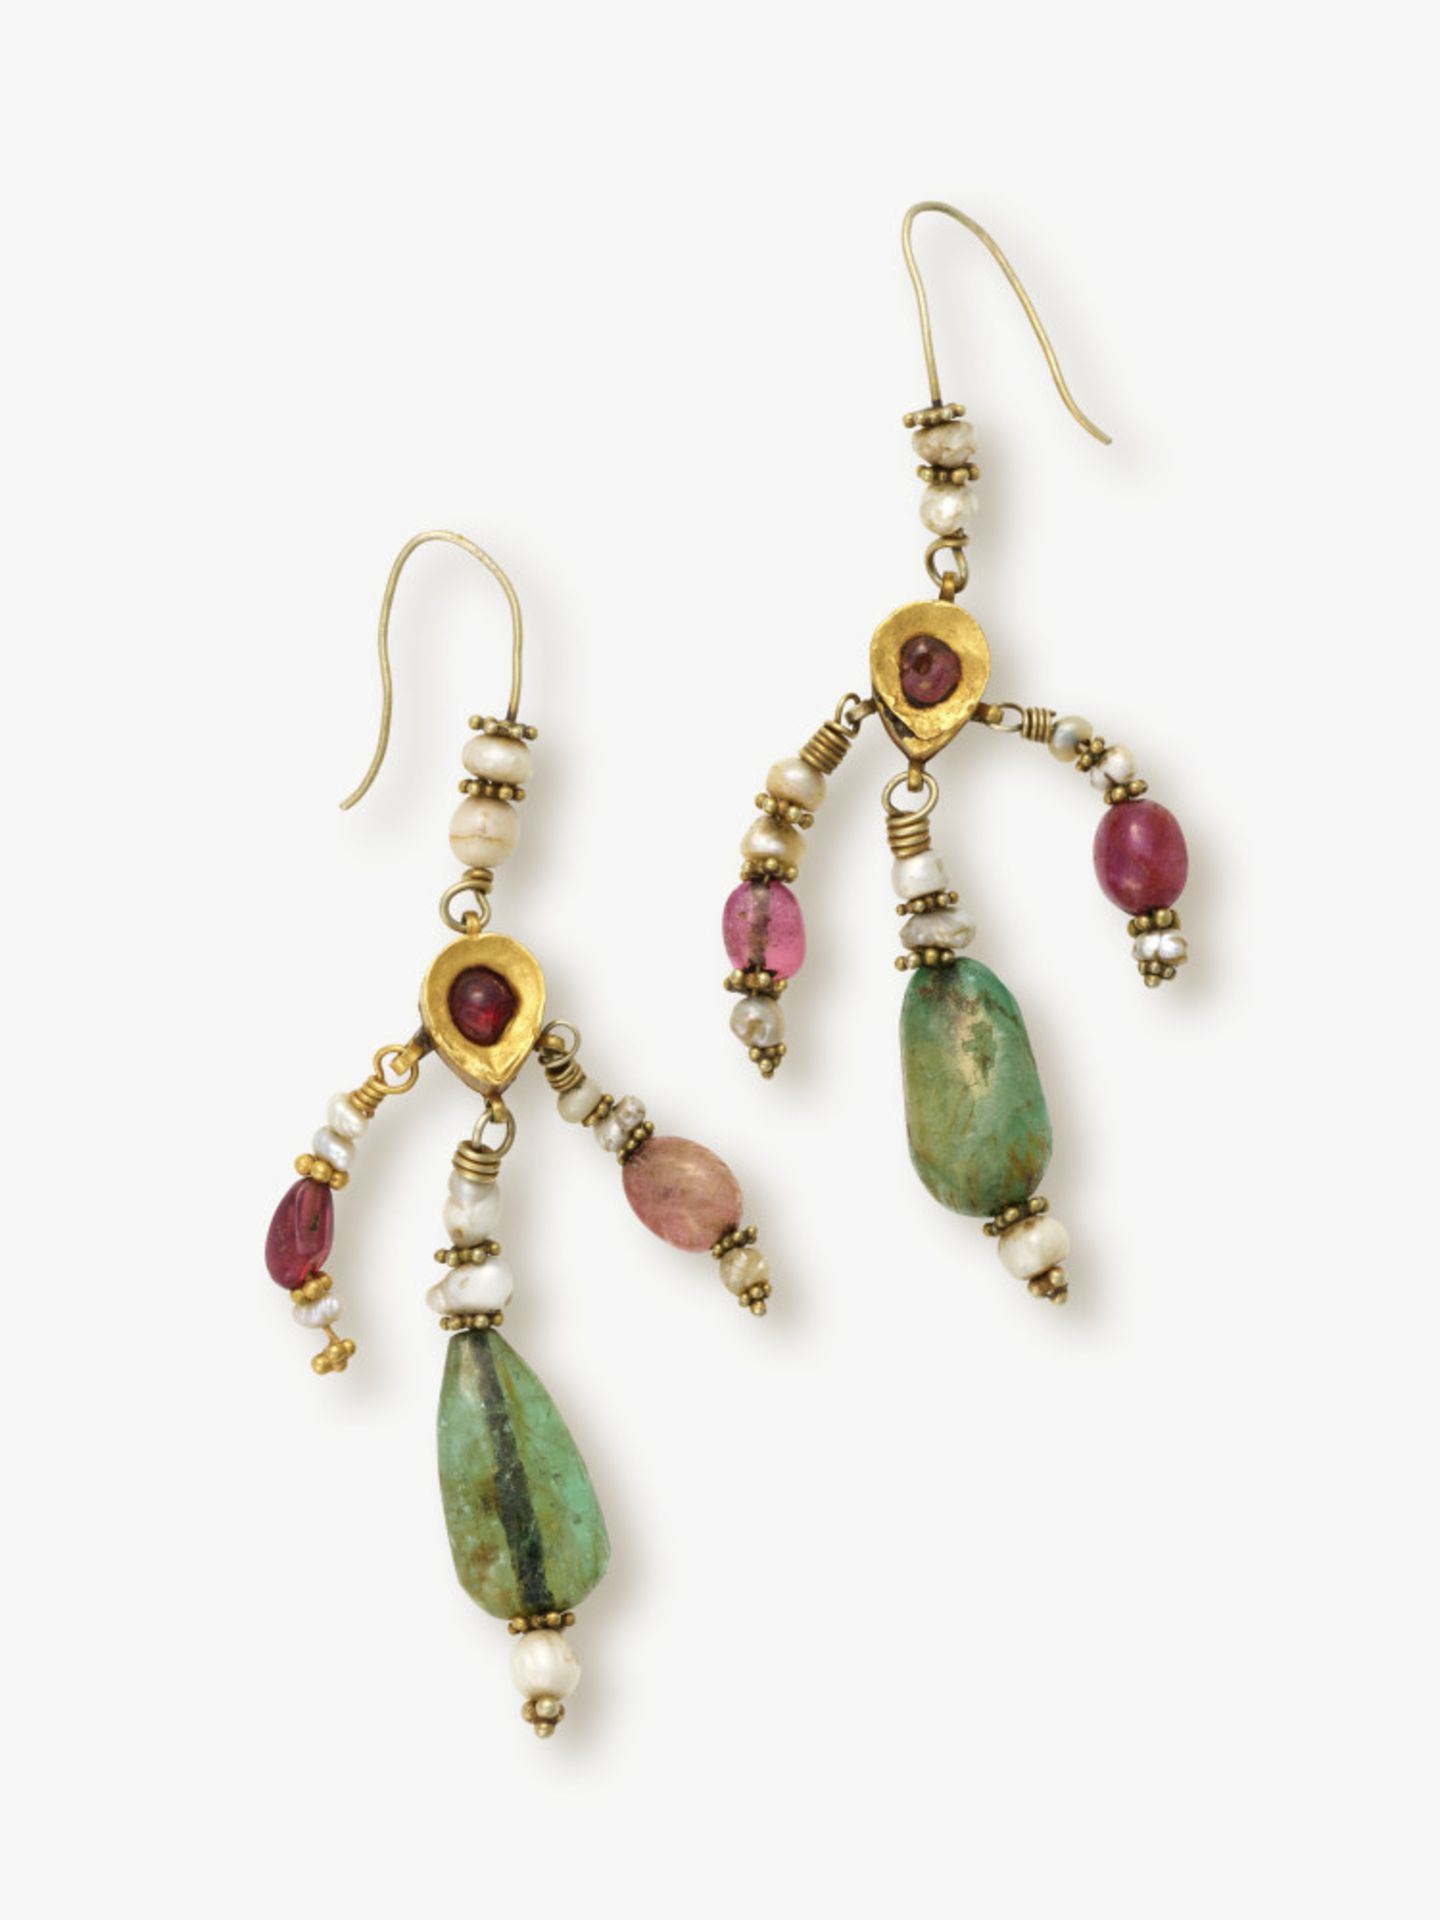 A pair of drop earrings with pearls, emeralds and a ruby